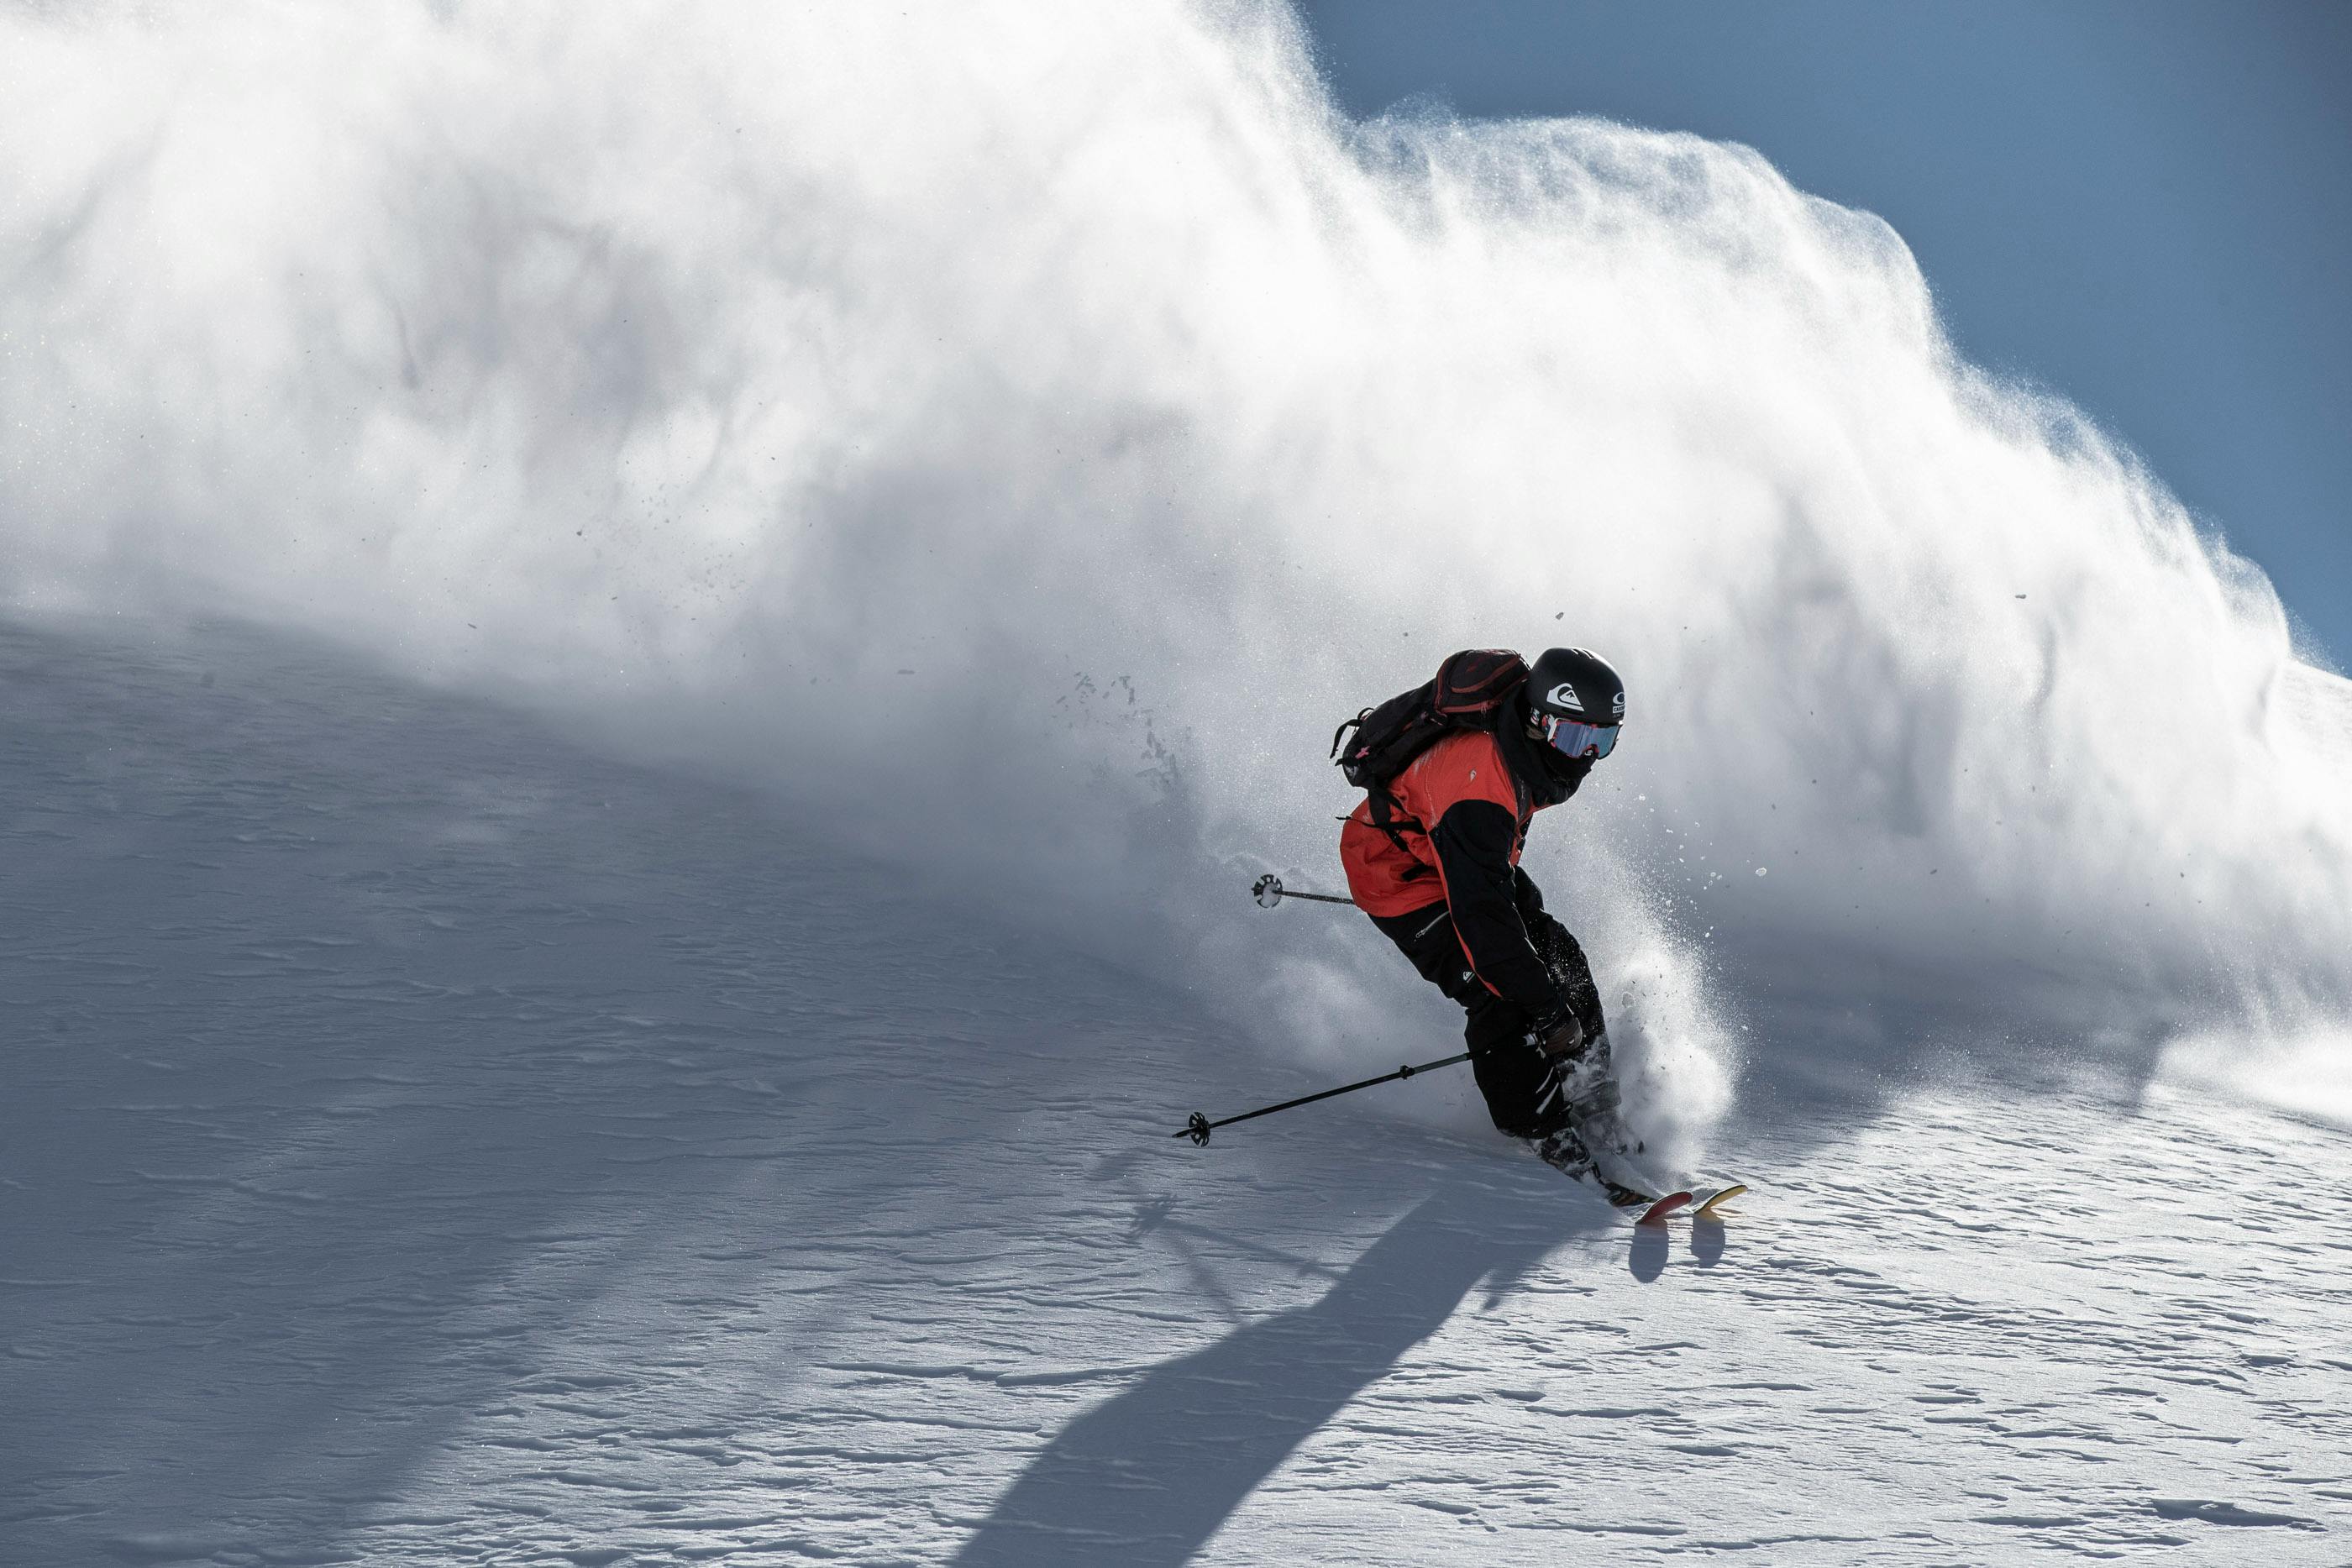 A male skier on Tour skis, holding his poles behind him, sending up a huge cloud of powder. 